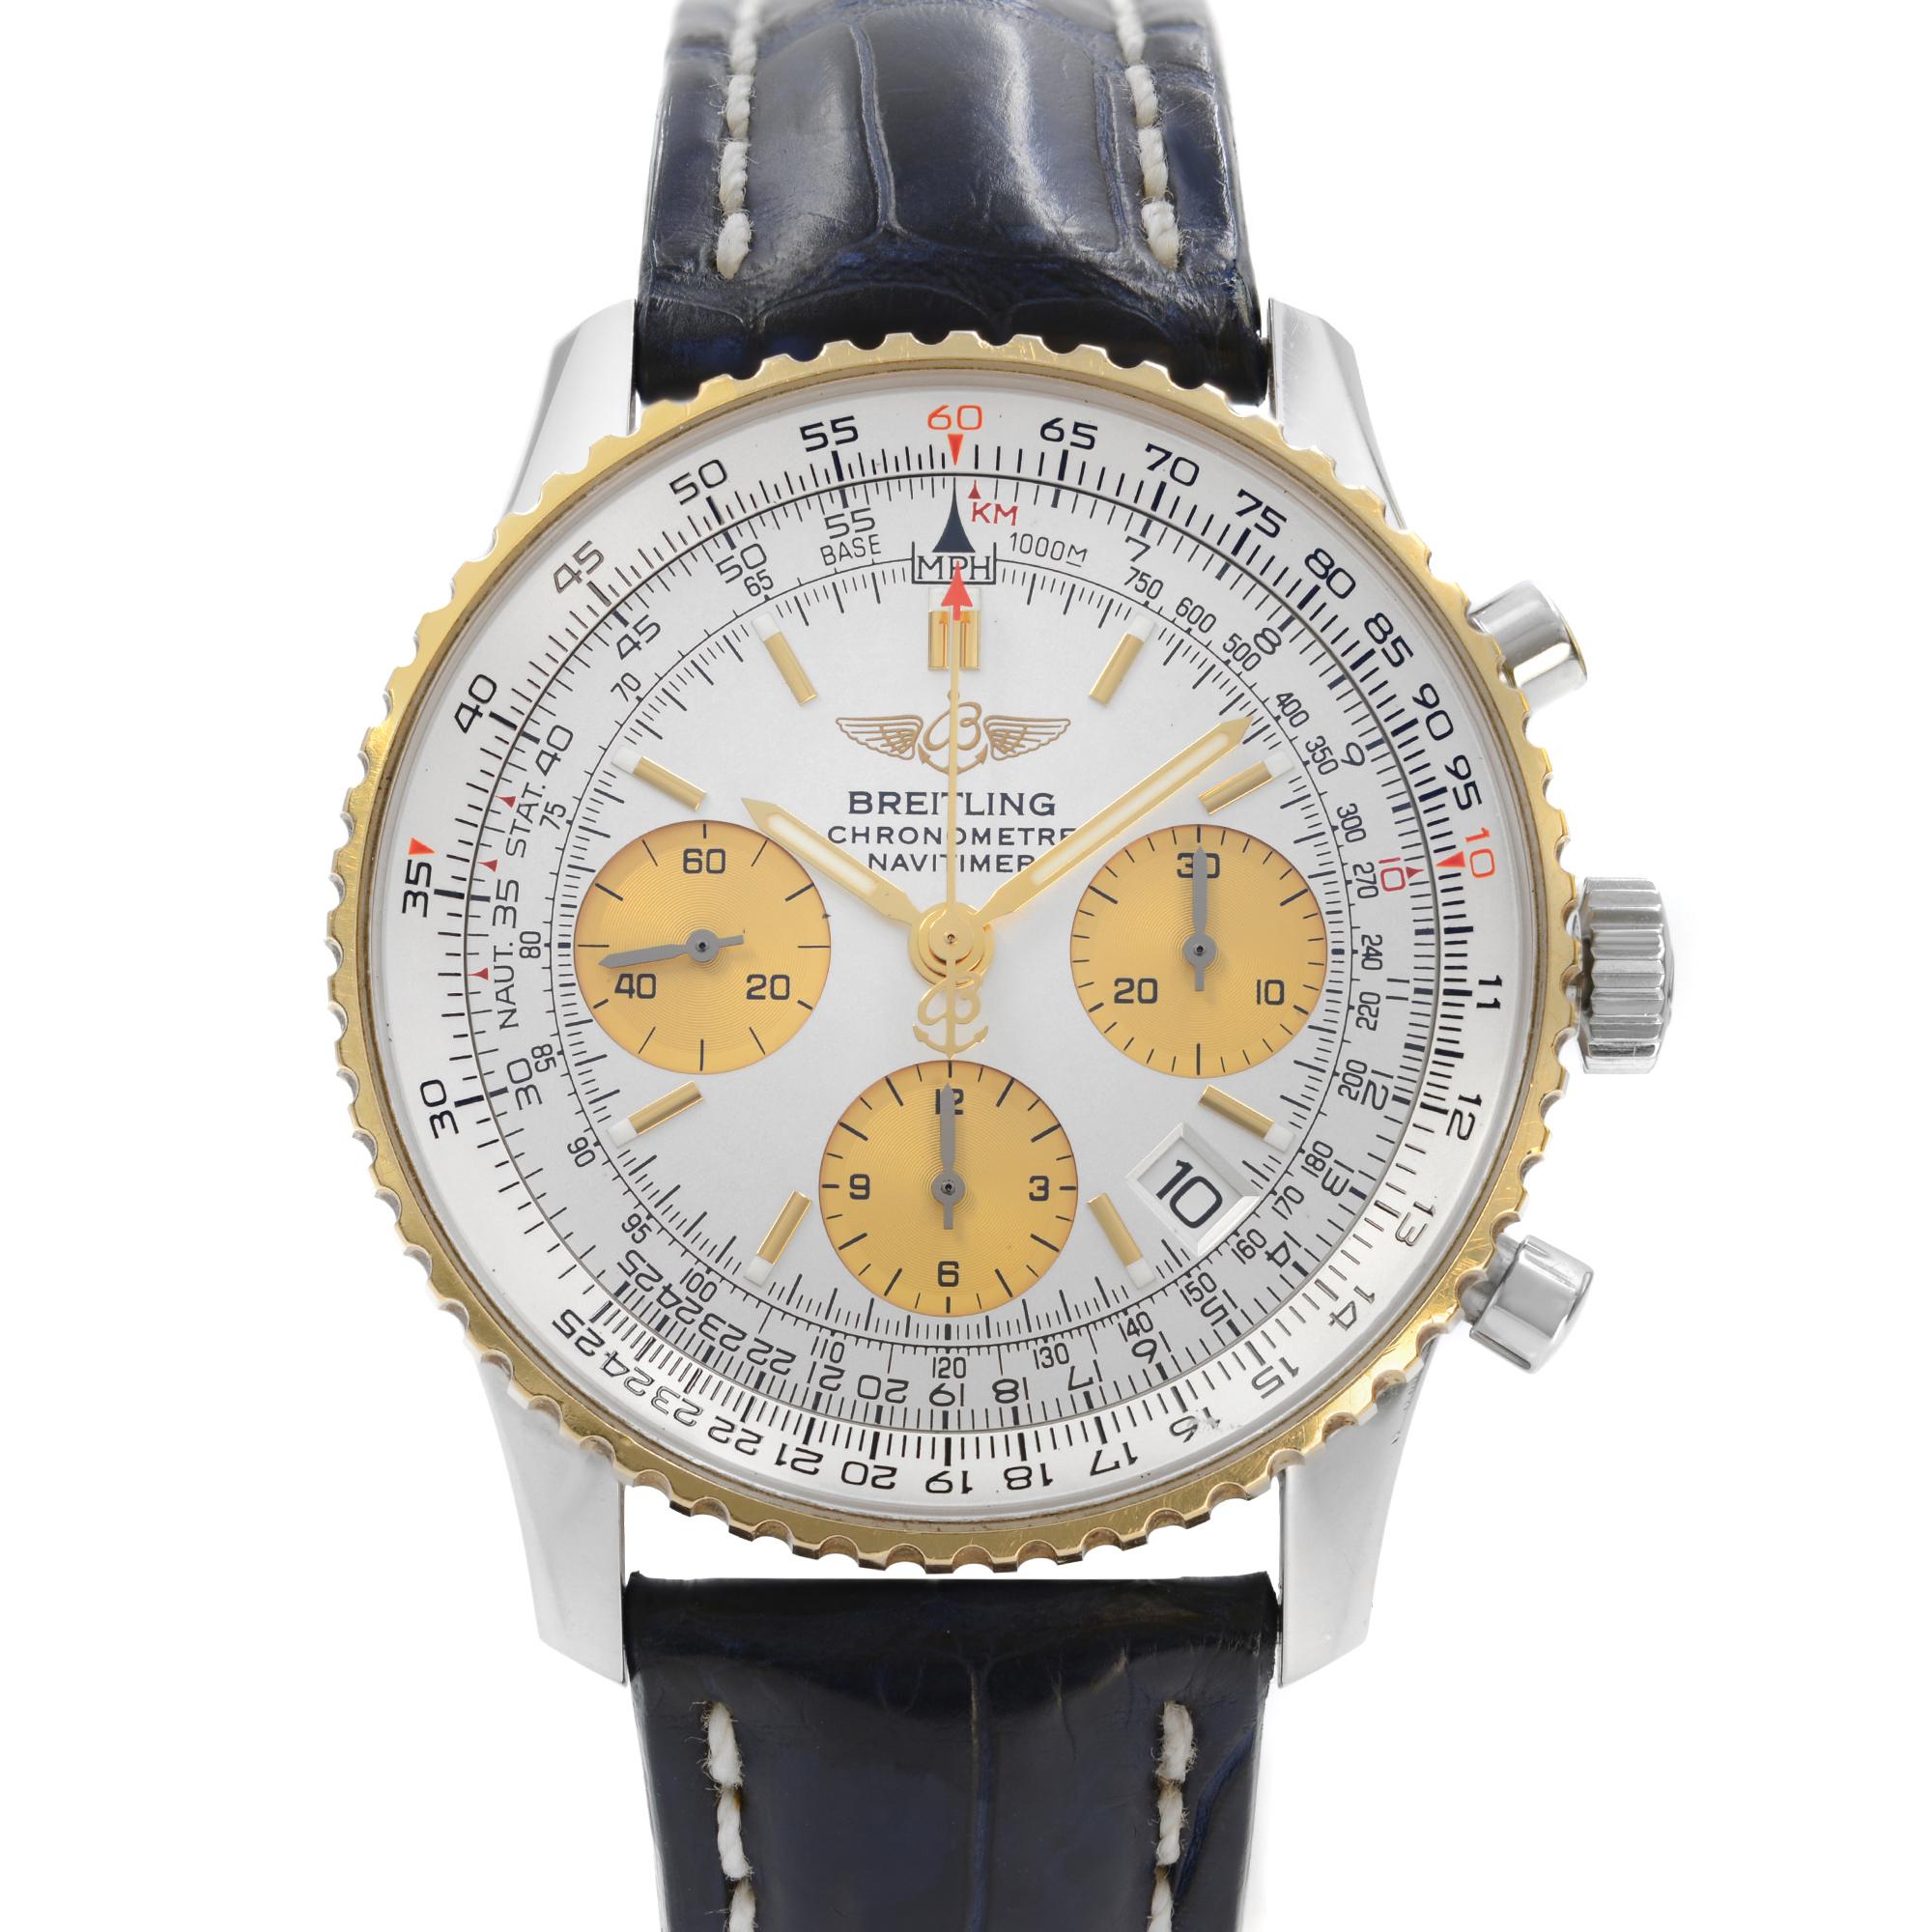 Pre-owned Breitling Navitimer 42mm 18K Gold Steel Silver Dial Men's Automatic Watch D23322. 18k yellow gold bezel. This Beautiful Timepeaice is Powered by an Automatic Movement and Features: Chronograph, Date indicator Between 4-5 O'Clock, 